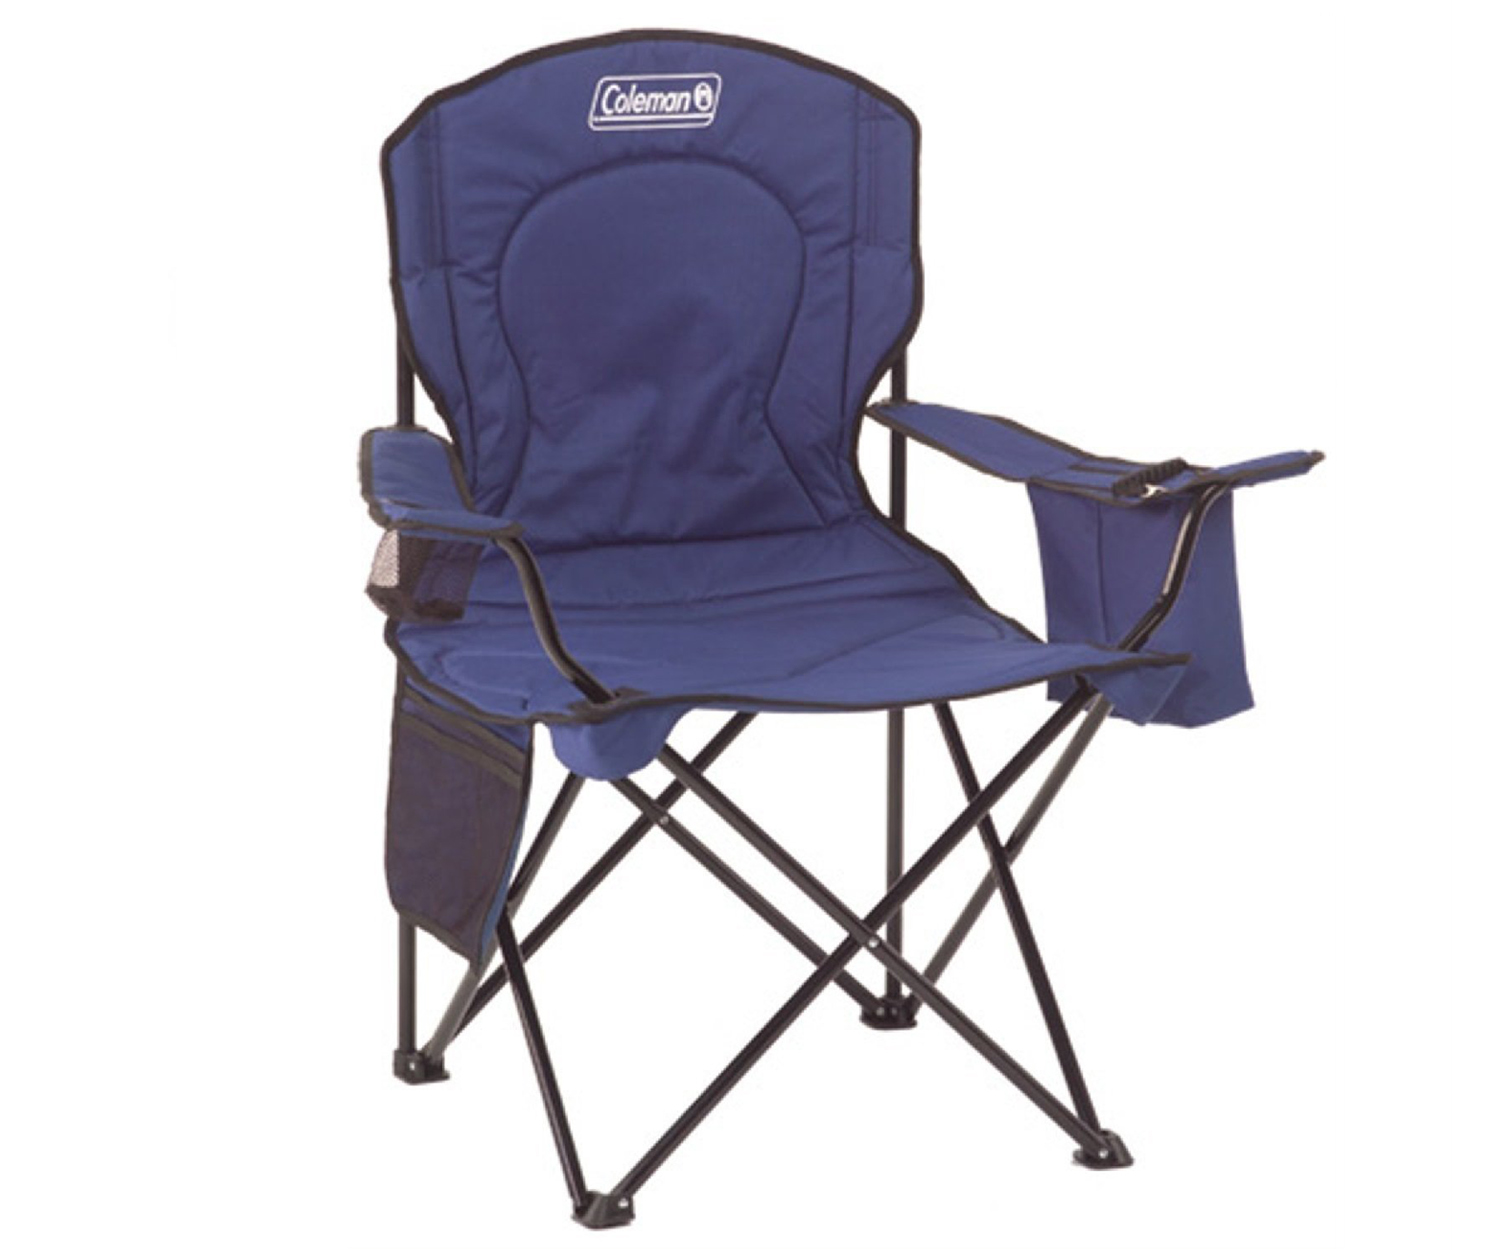 Camp Chair w/ Cooler Sidepocket